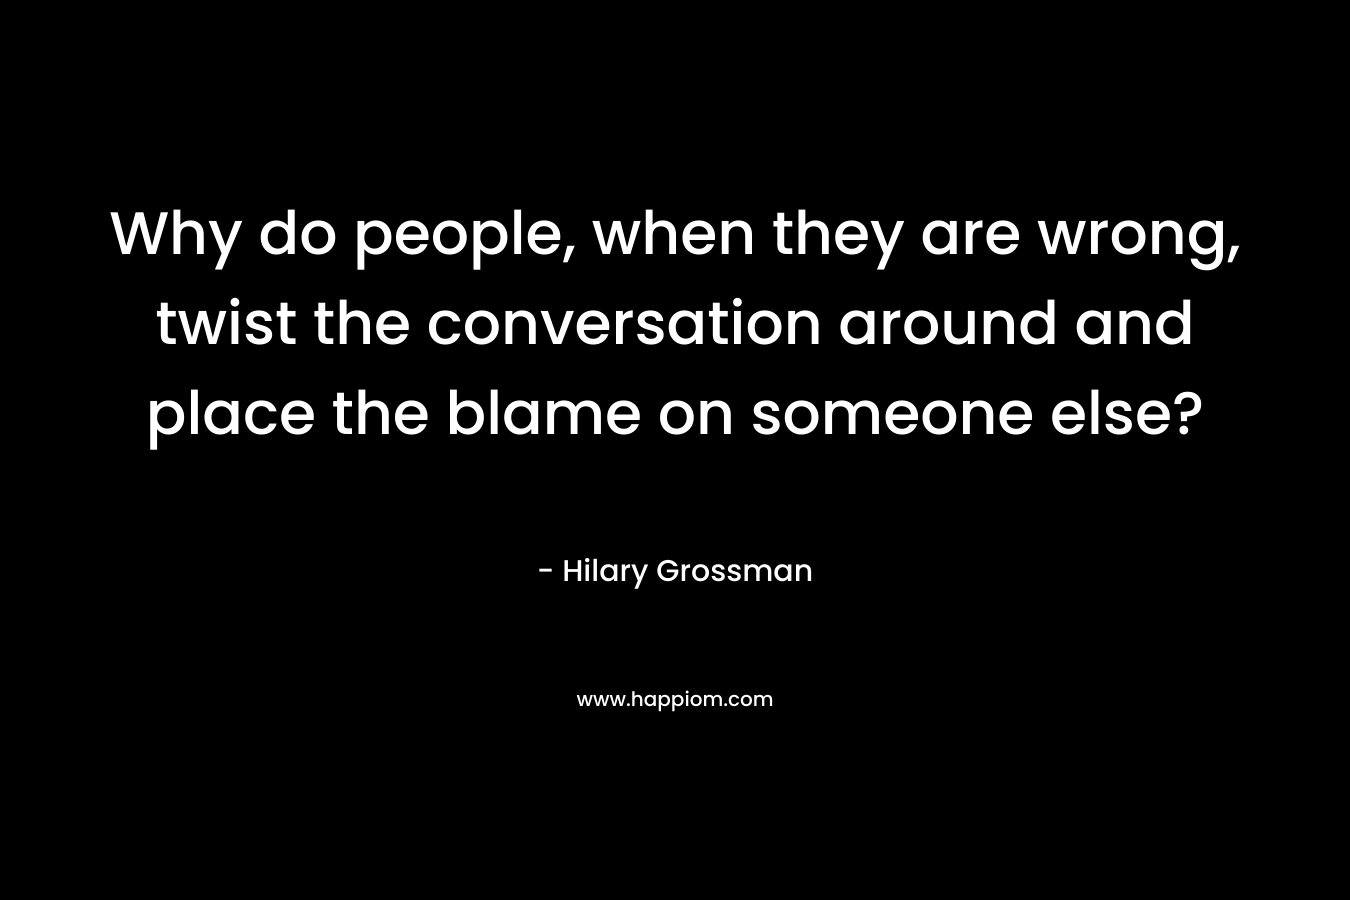 Why do people, when they are wrong, twist the conversation around and place the blame on someone else? – Hilary Grossman